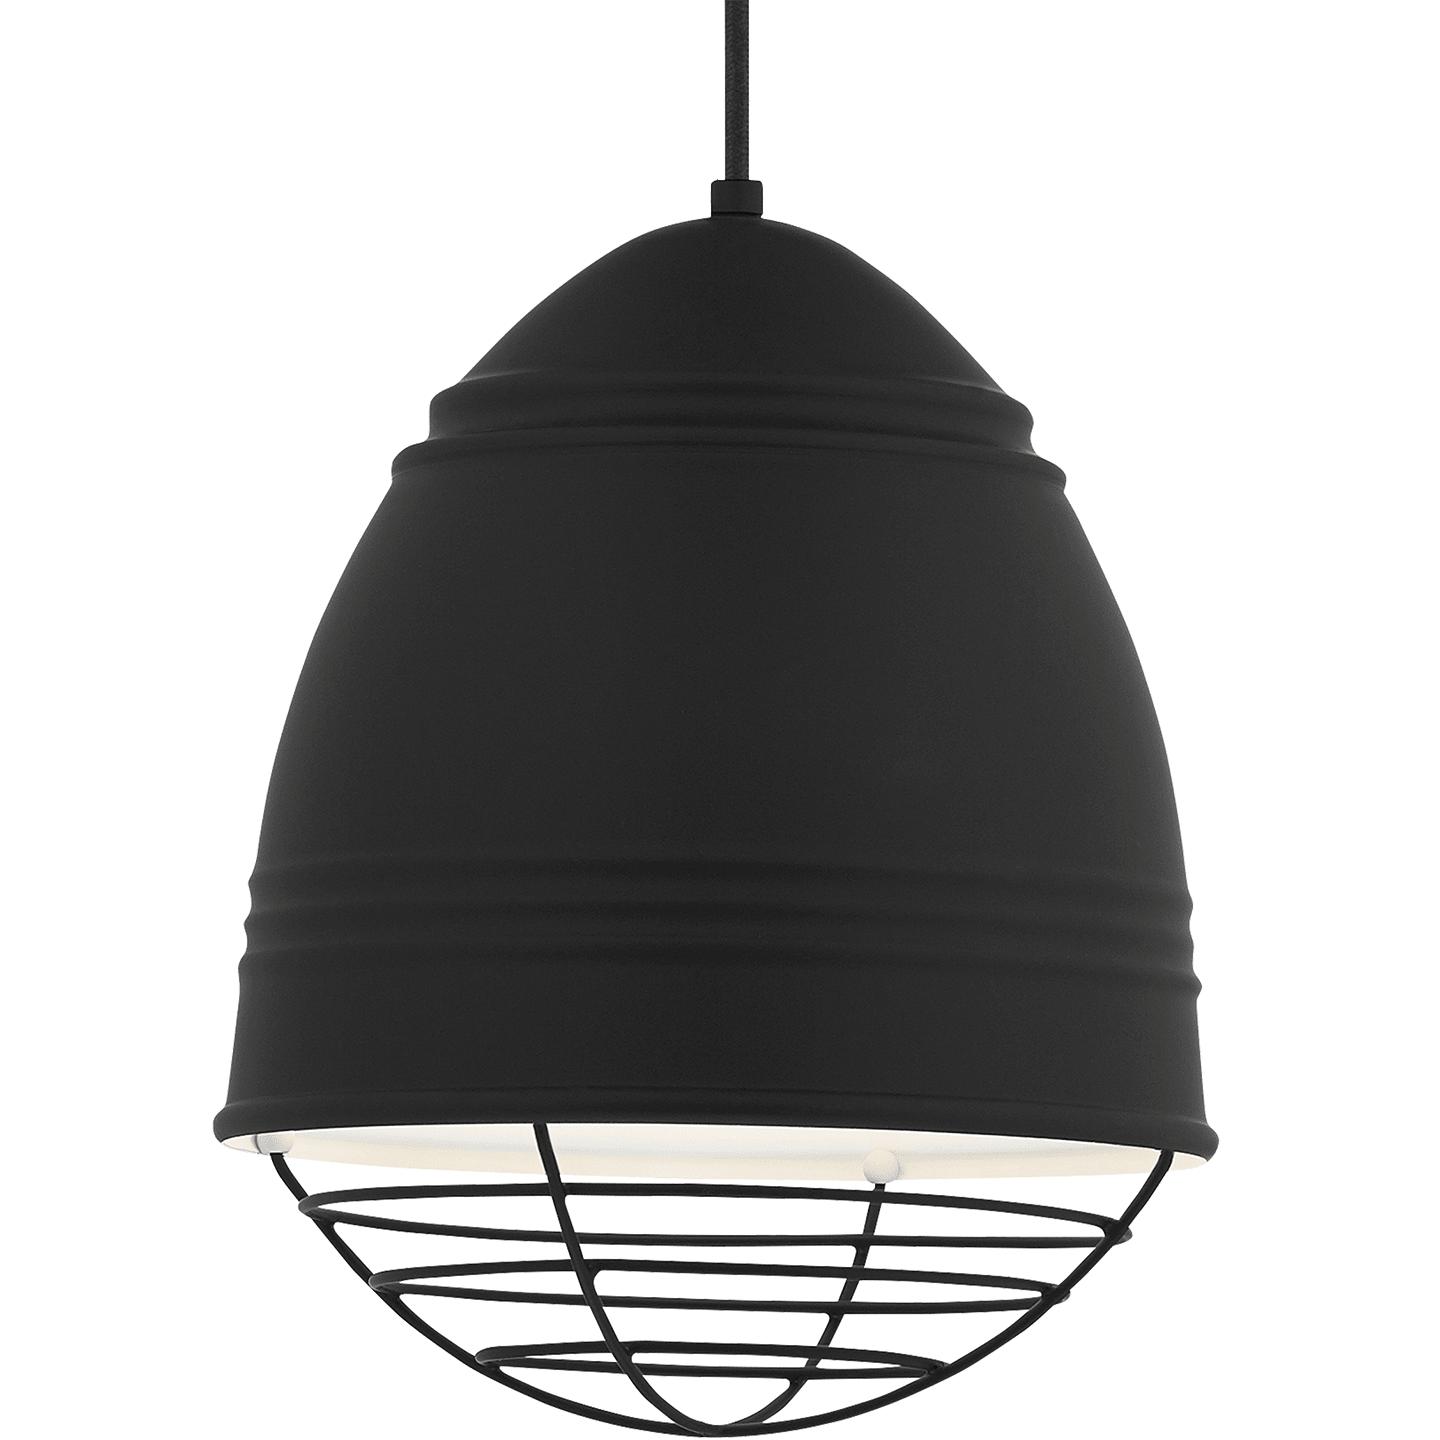 Rubberized Black w/ White Interior Lamp Not Included Black